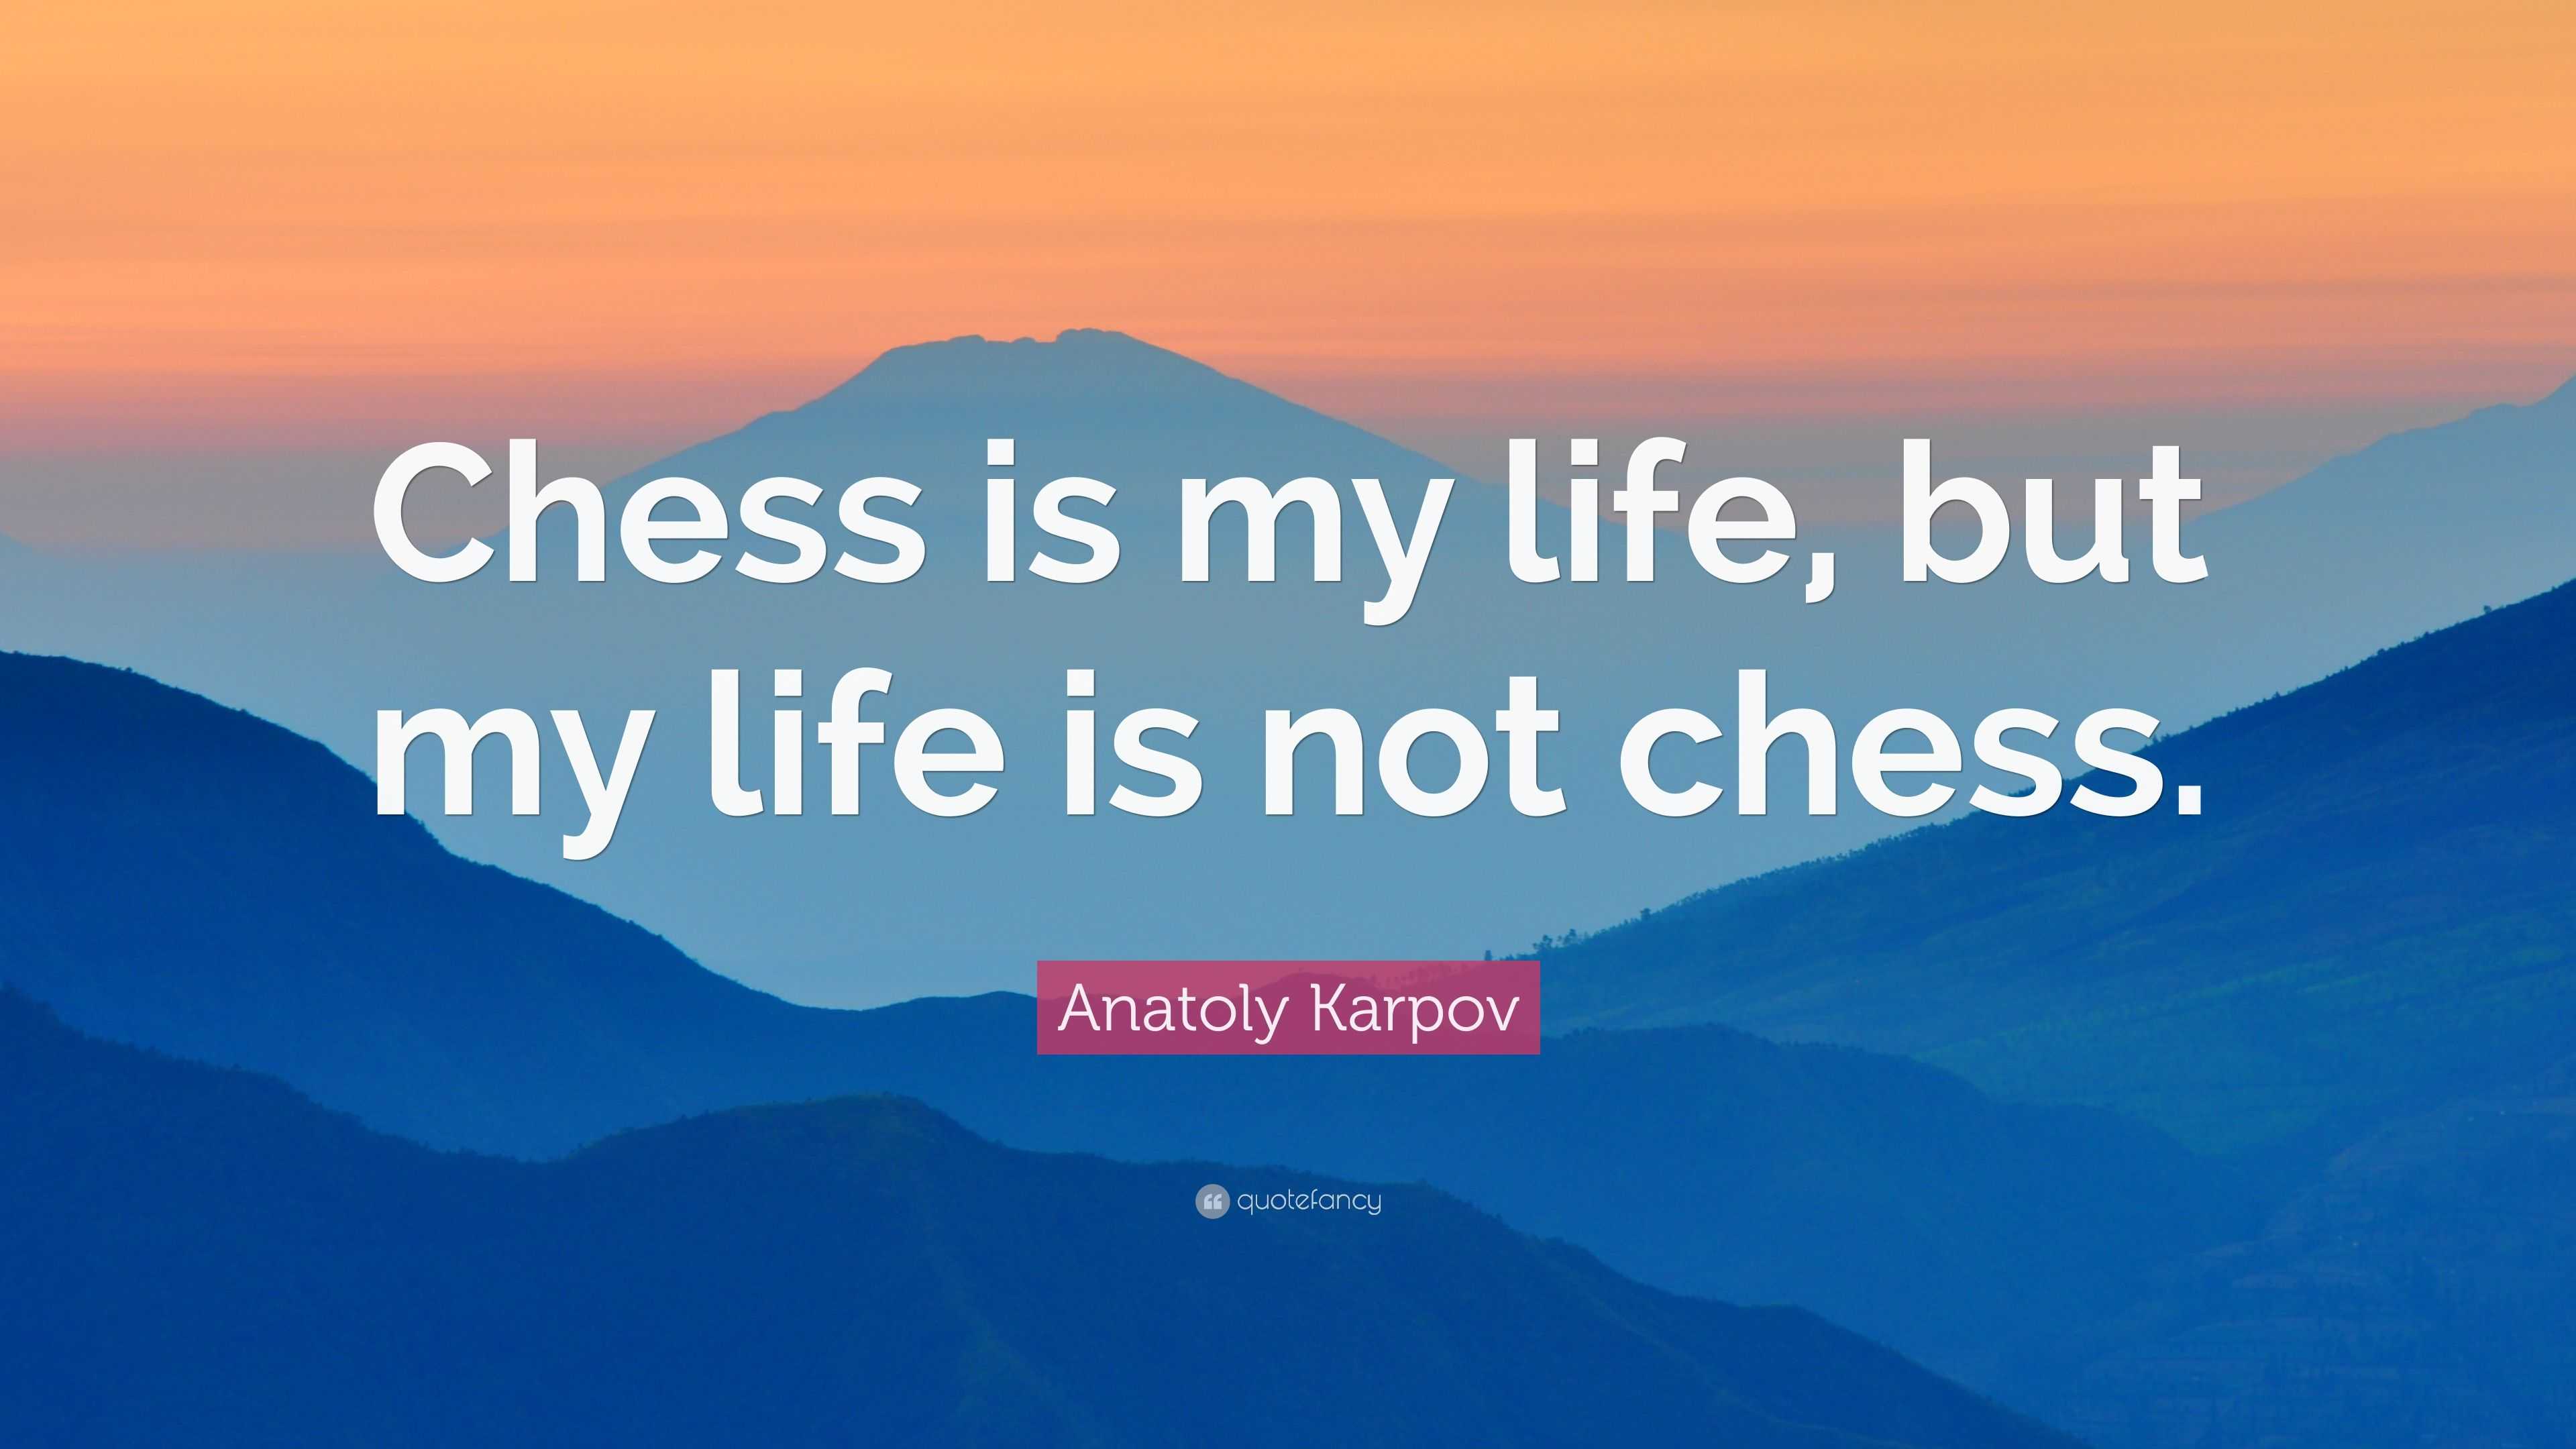 Anatoly Karpov Quote: “Chess is my life, but my life is not chess.”